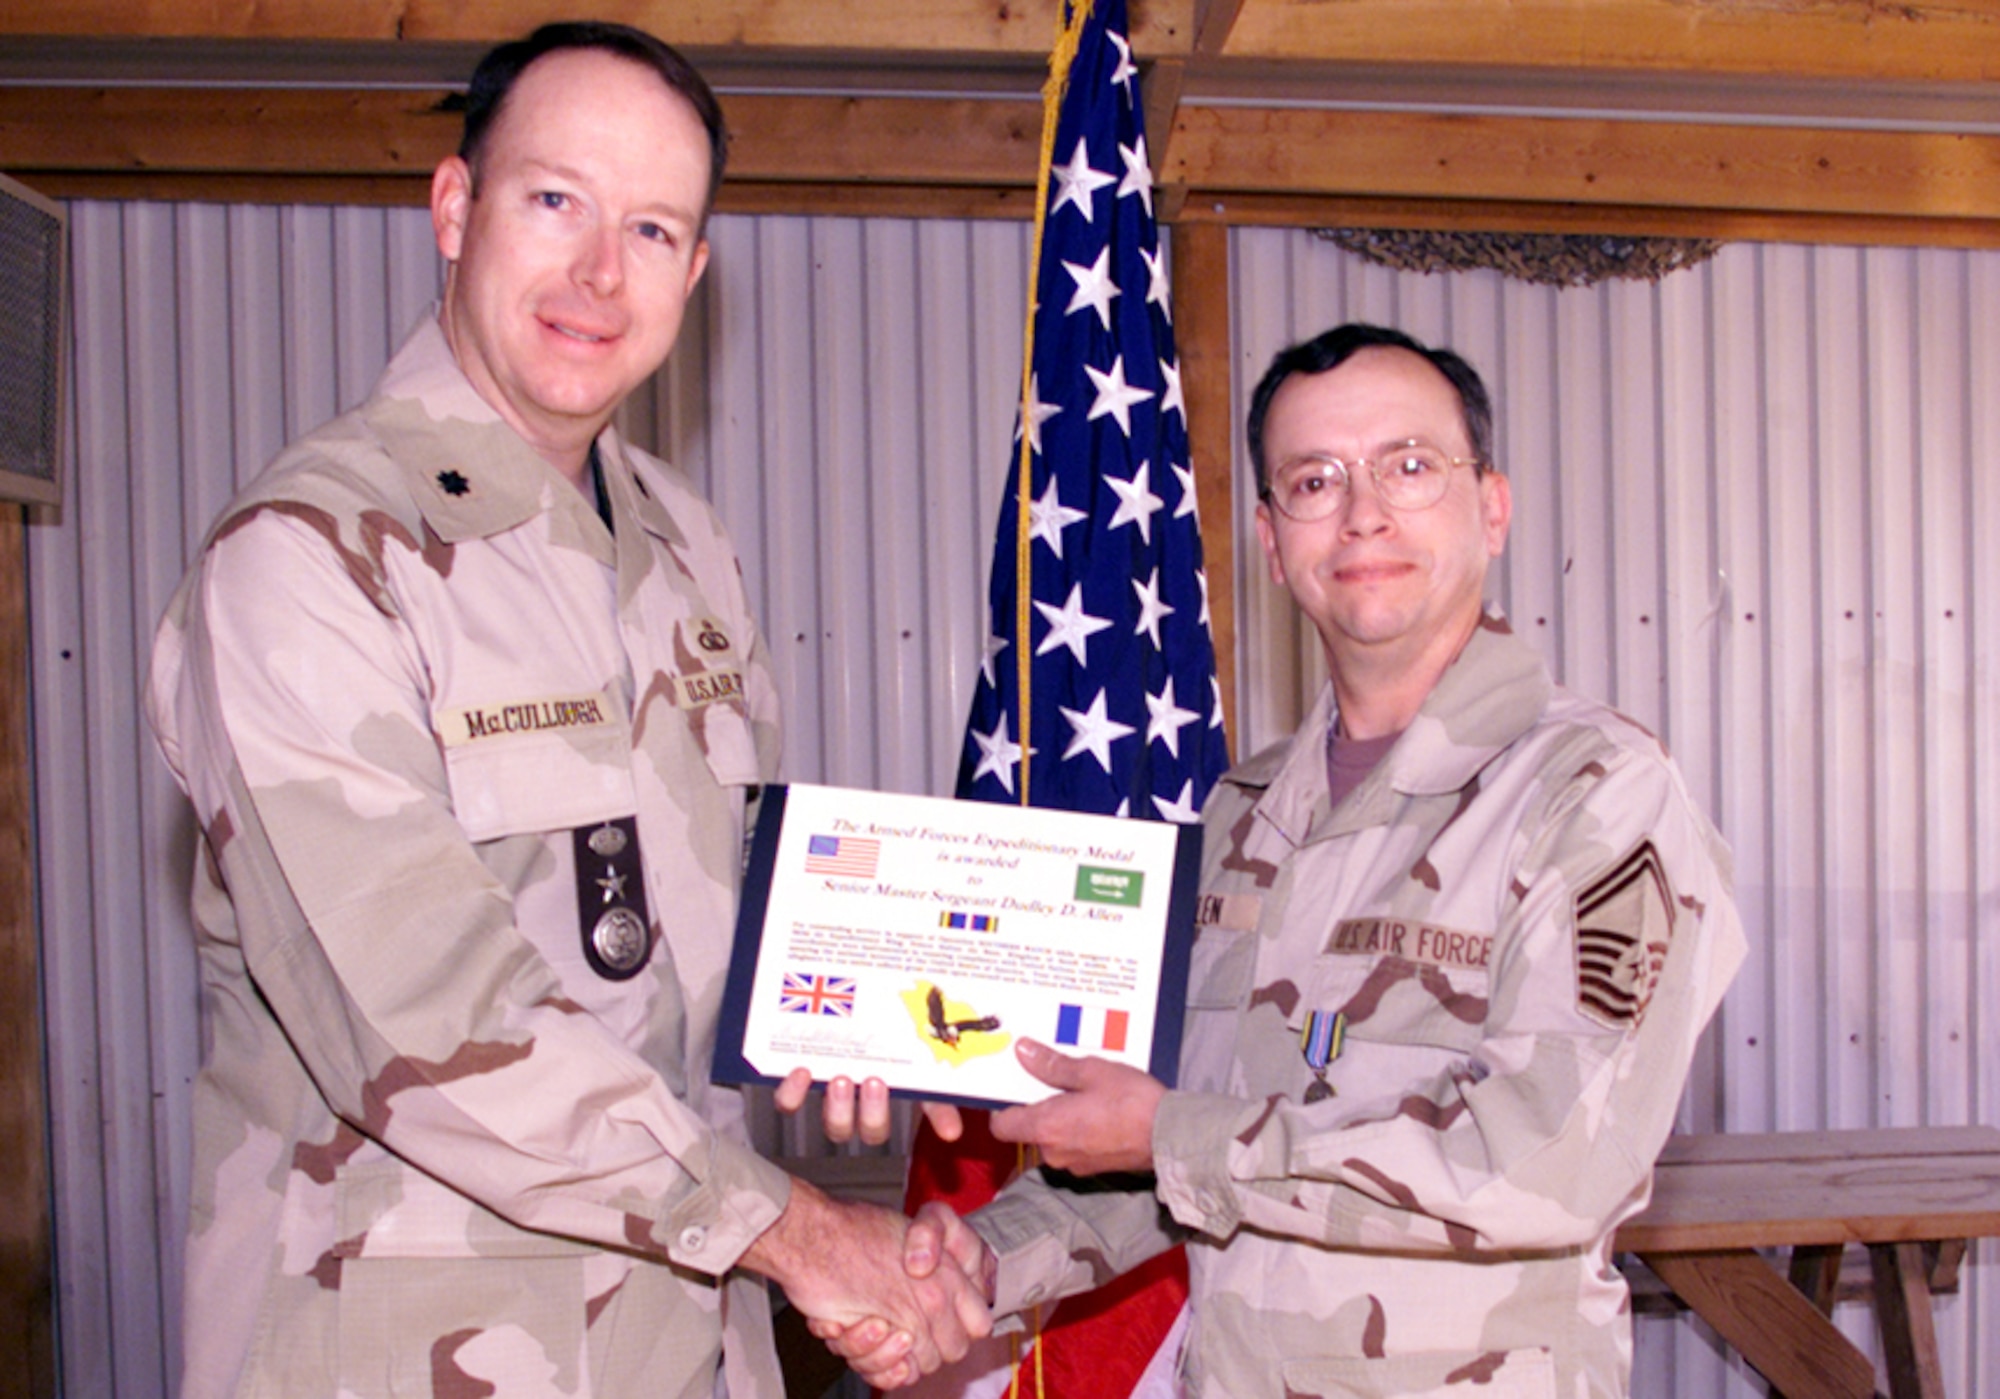 Lt. Col. McCullough presents Senior Master Sgt. Dudley Allen with an Armed Forces Expeditionary Medal certificate for his achievements during Operation Southern Watch in 2000.